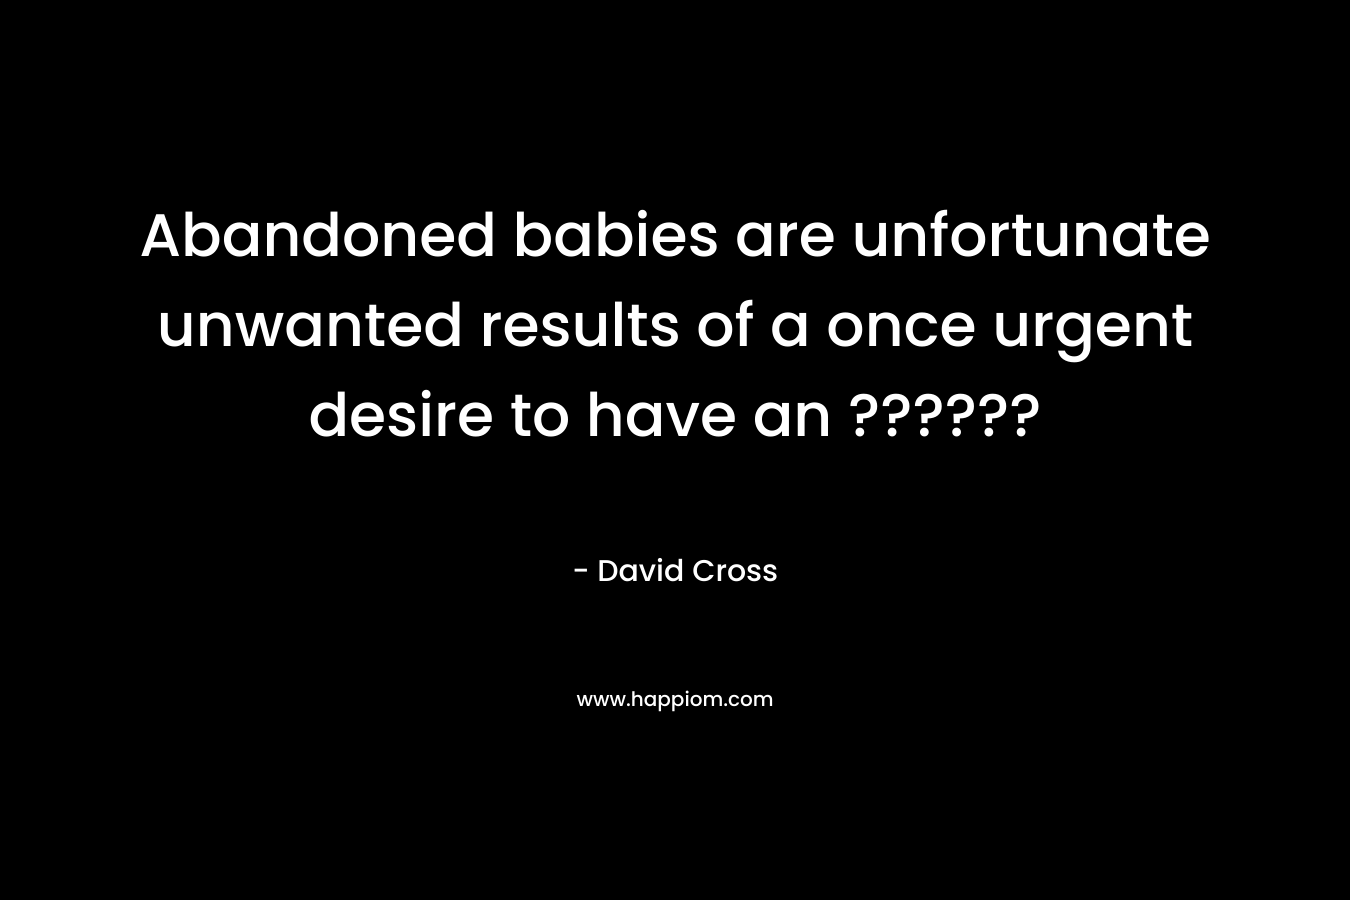 Abandoned babies are unfortunate unwanted results of a once urgent desire to have an ??????